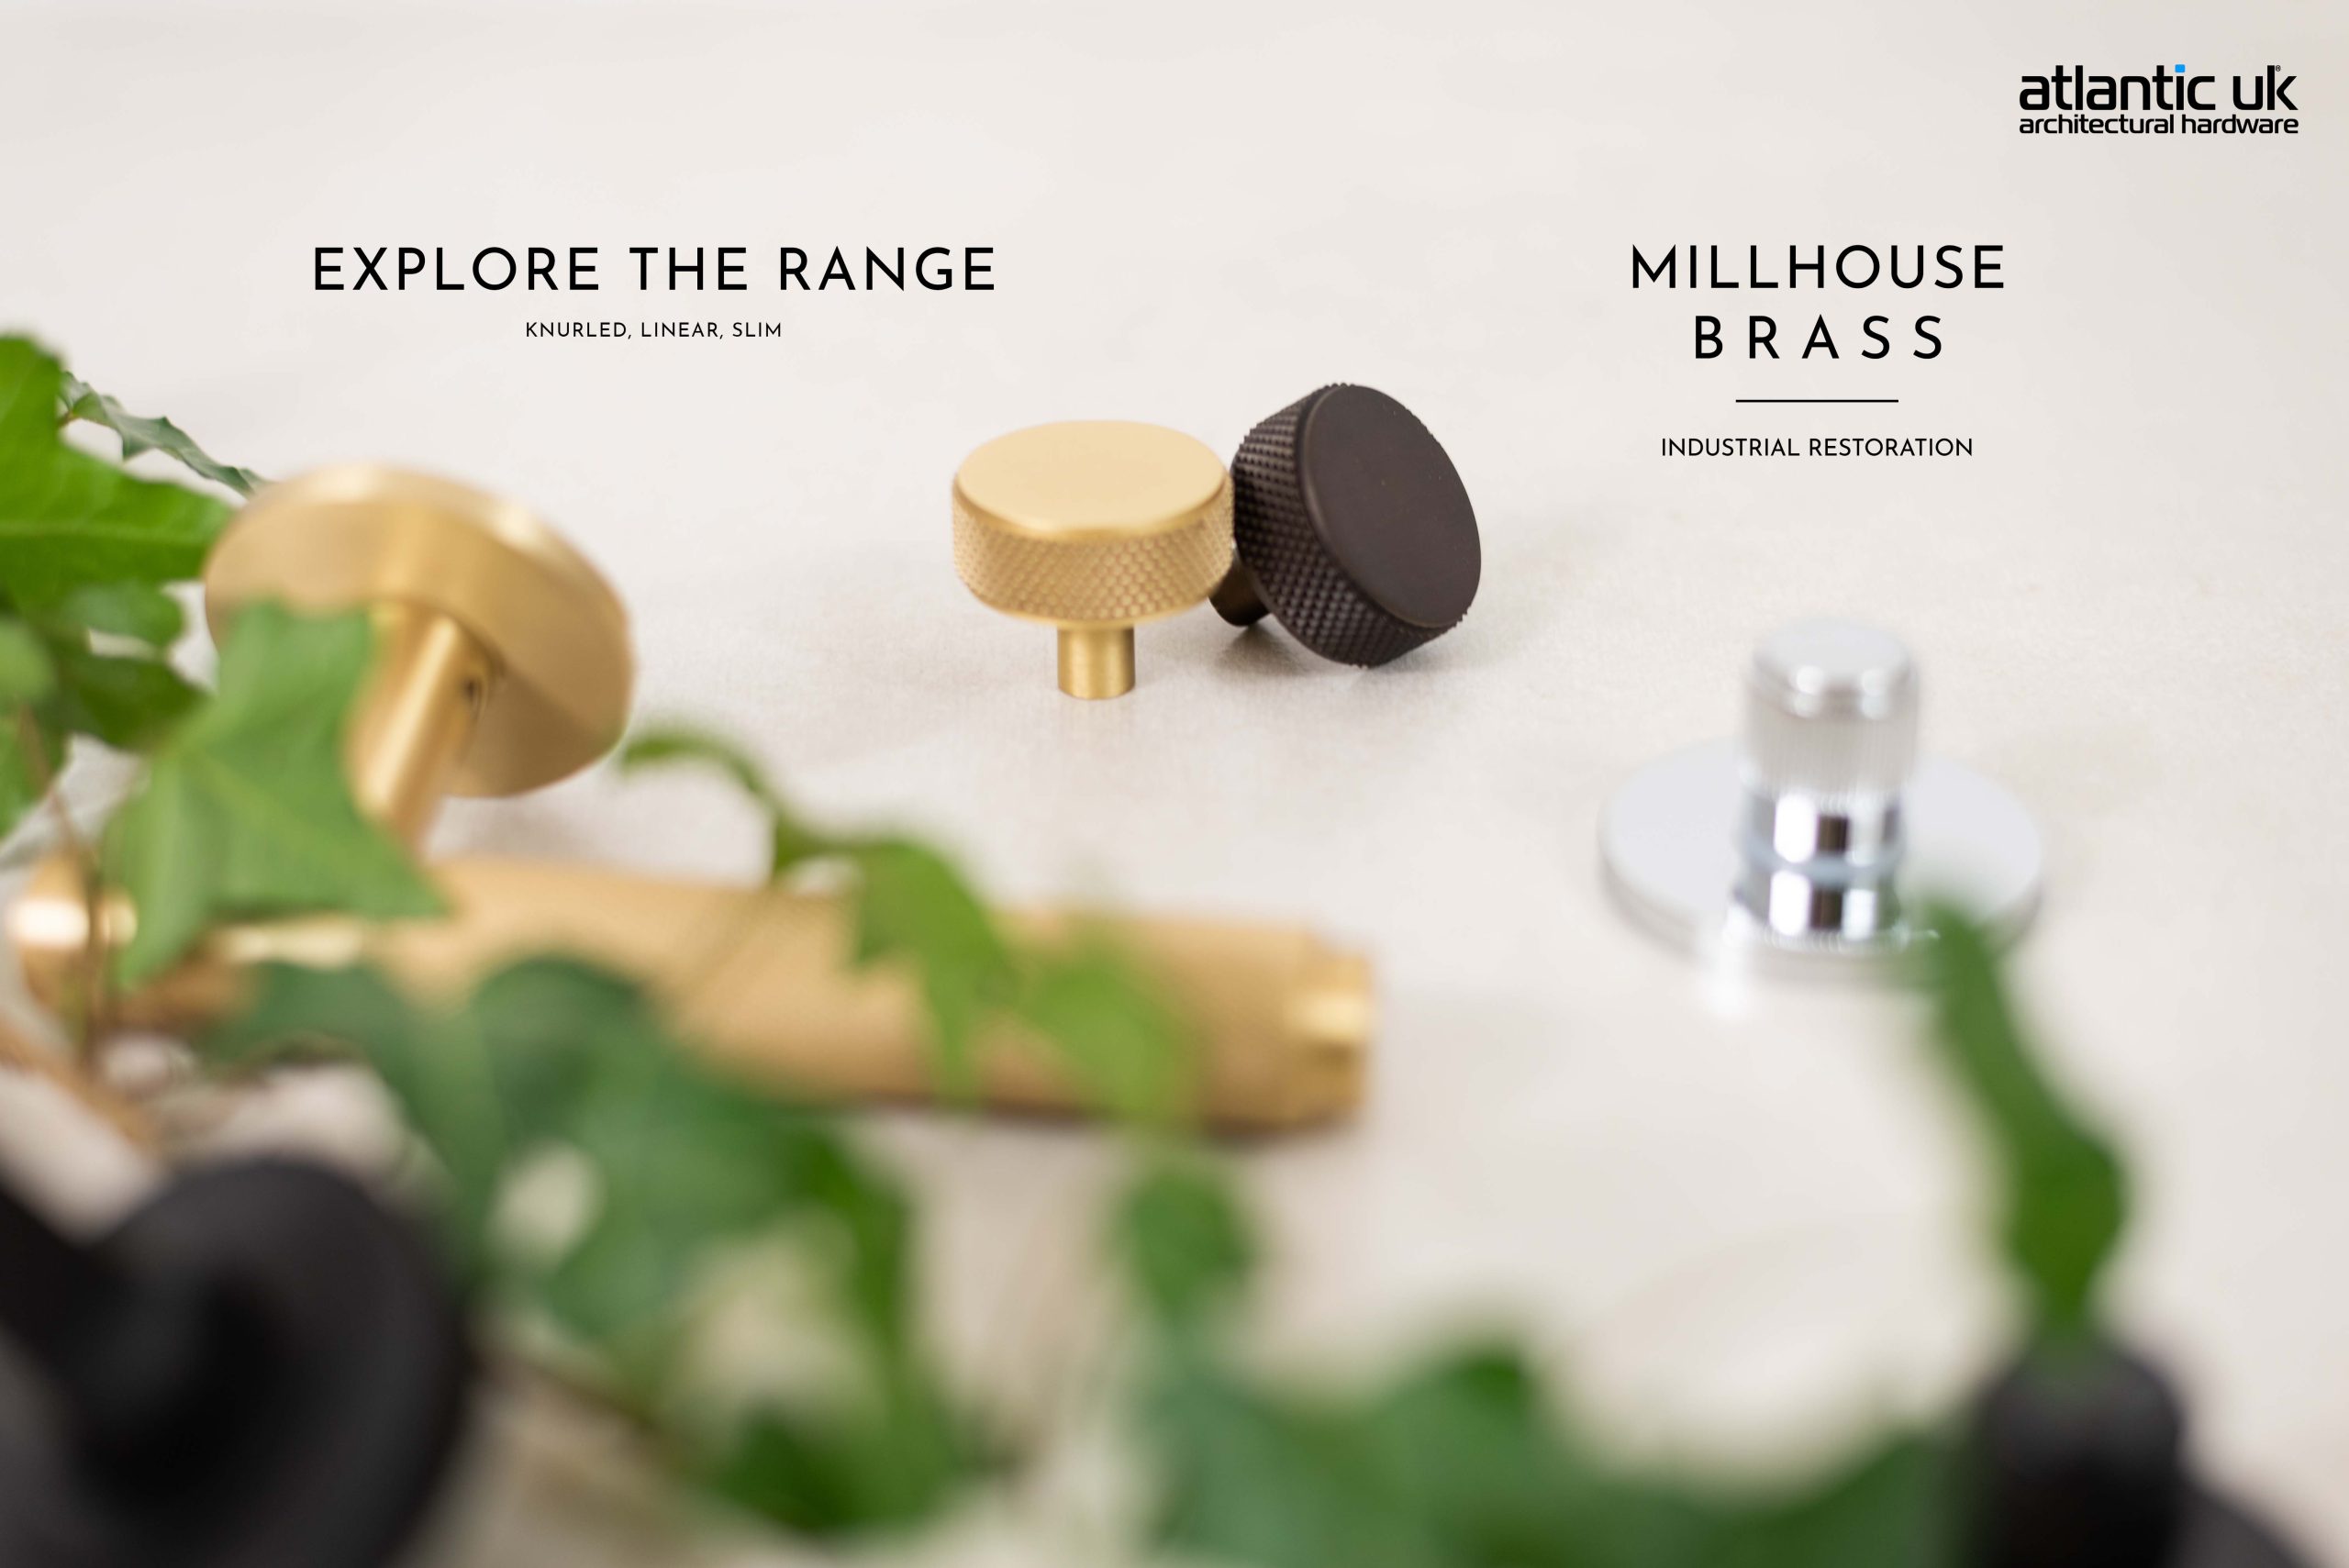 LEARN MORE ABOUT OUR LATEST MILLHOUSE BRASS DESIGNER LEVERS!